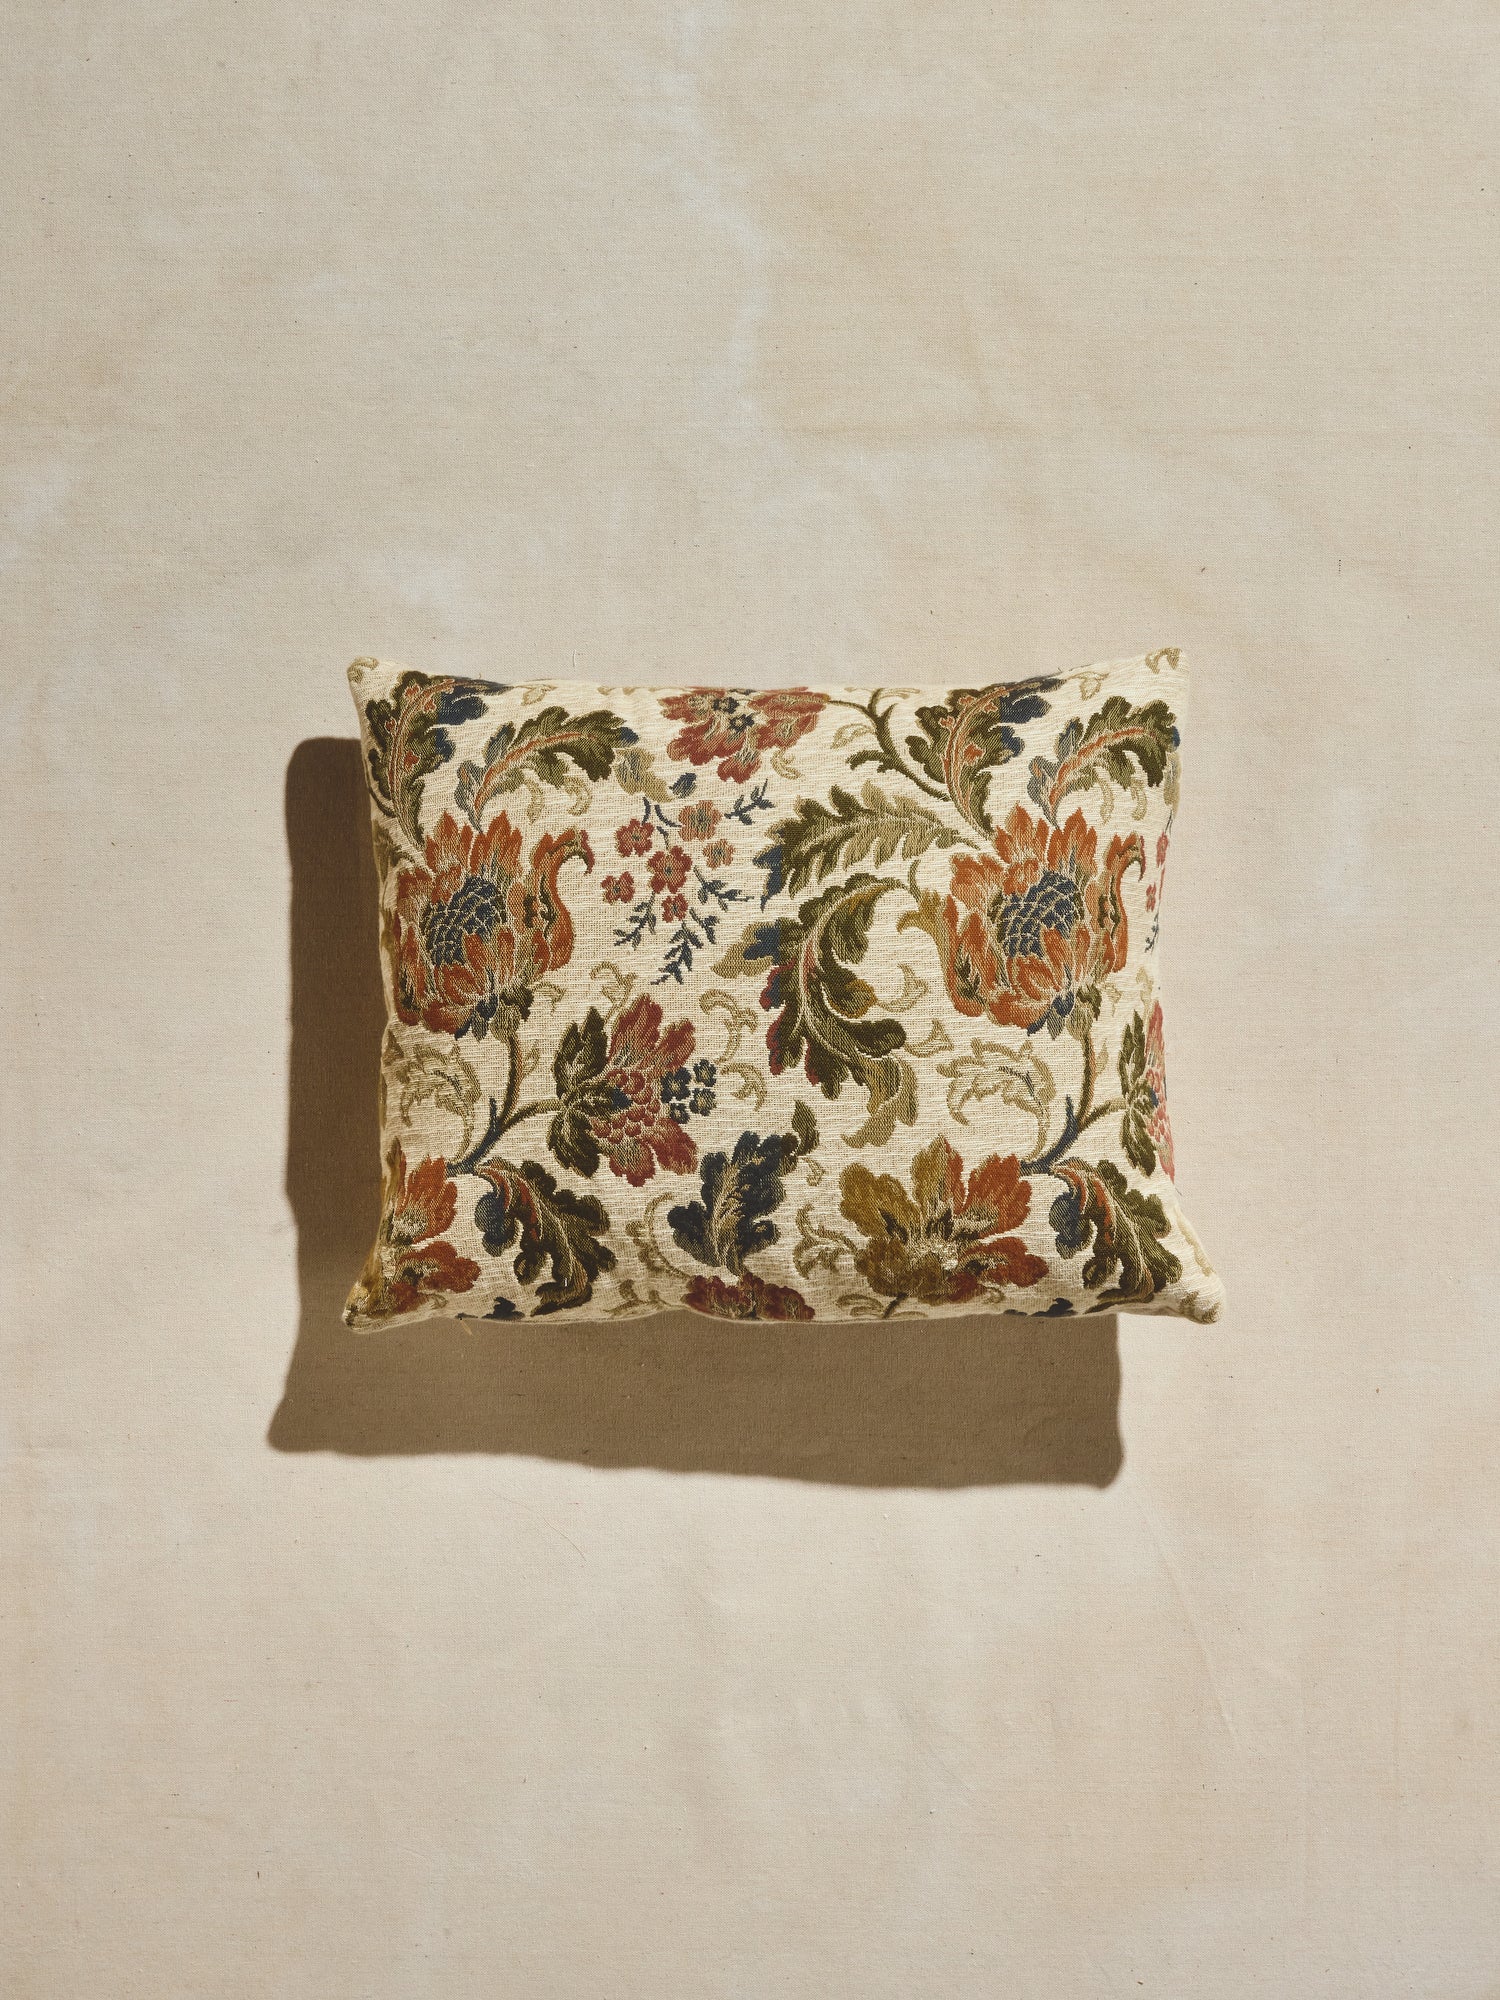 Vintage style floral pattern on our woven rectangular Primavera pillow and down feather blend insert.